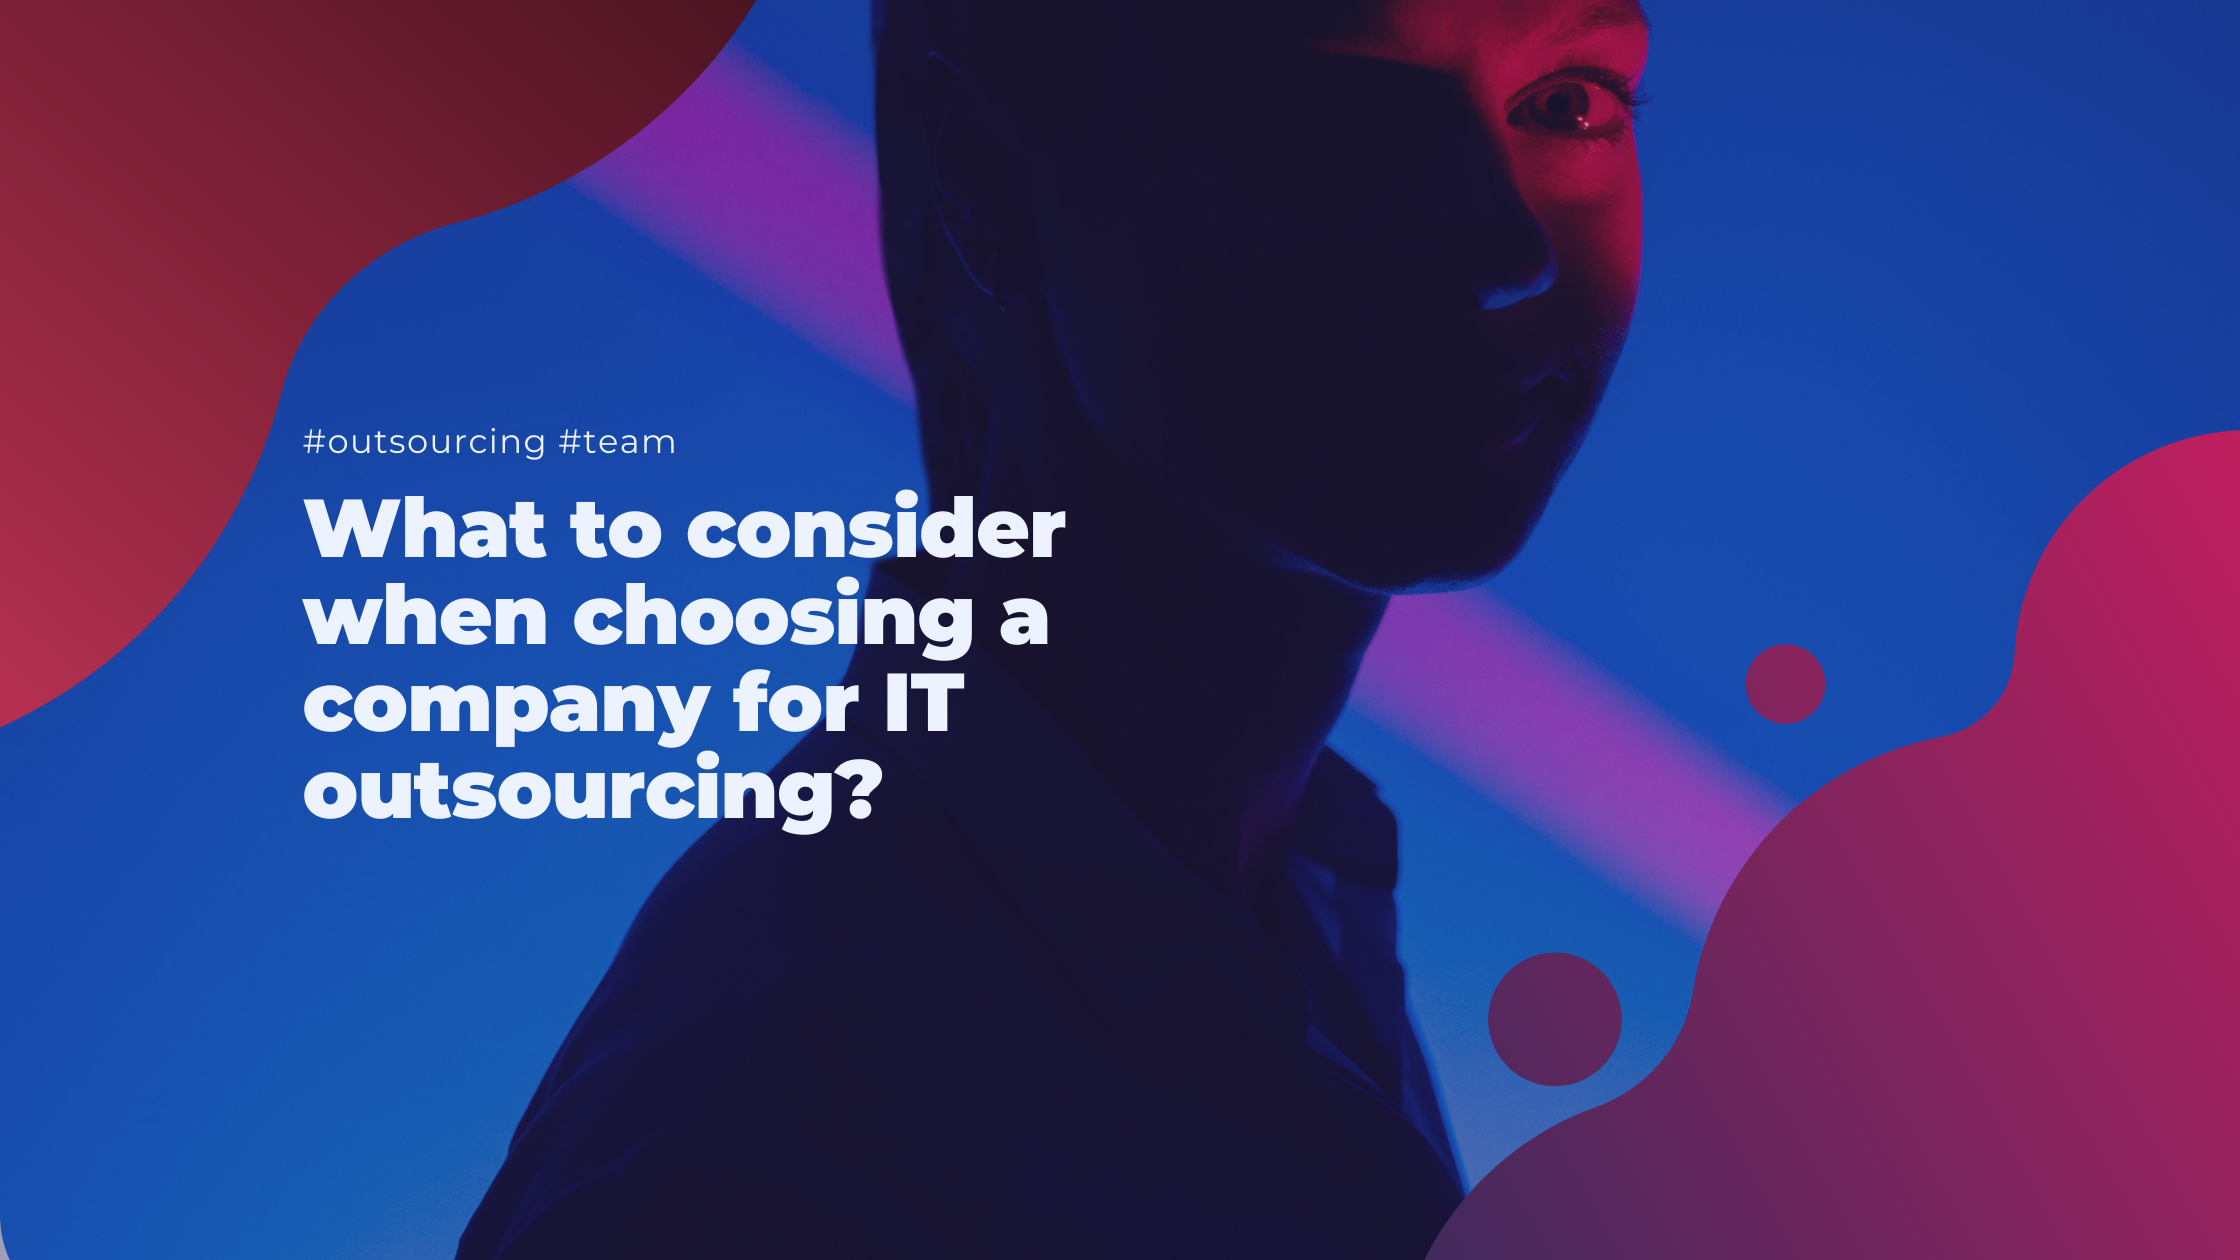 What to consider when choosing a company for IT outsourcing?